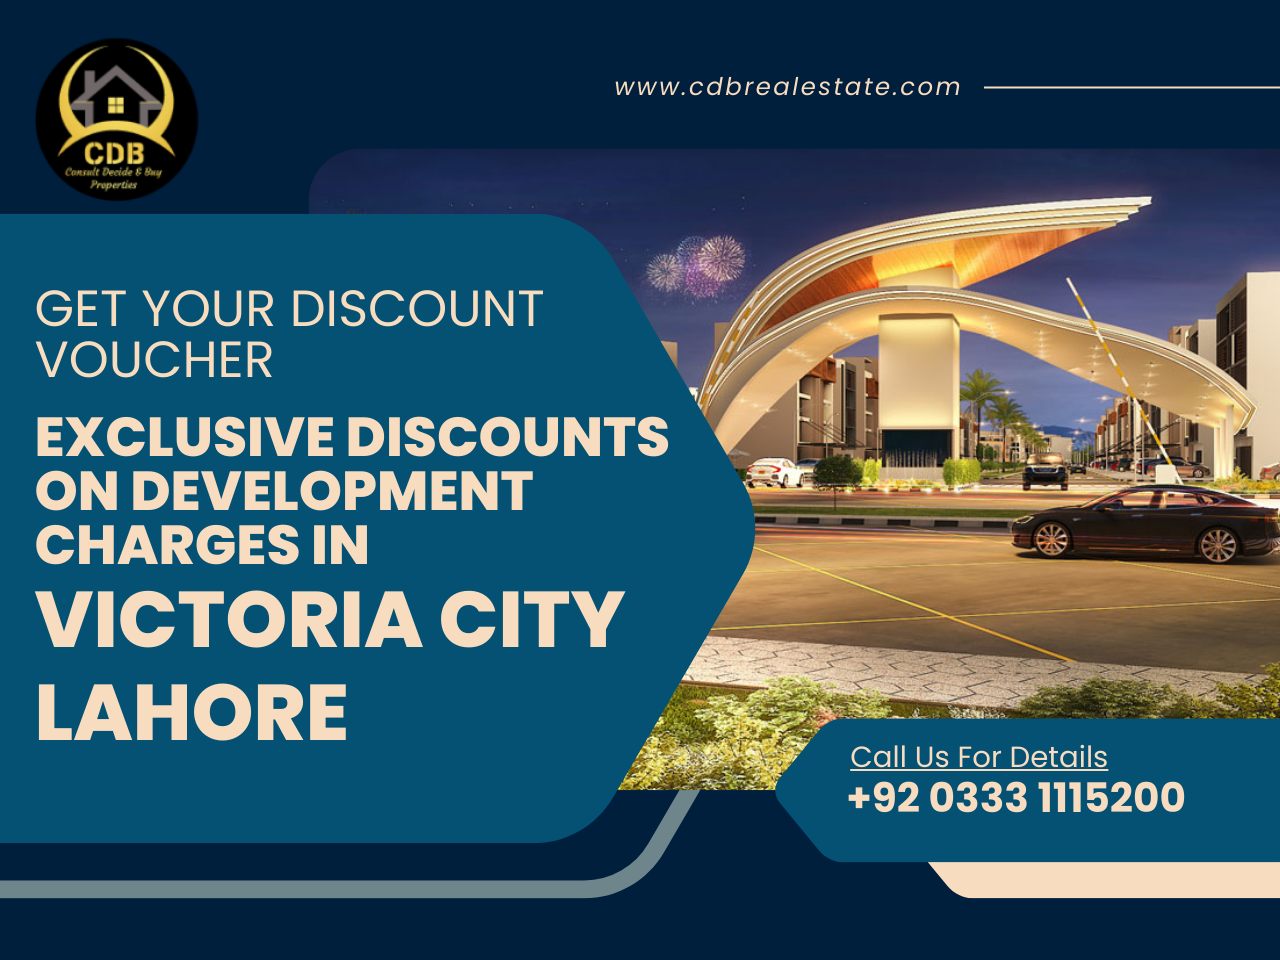 Get Your Discount Voucher: Exclusive Discounts on Development Charges in Victoria City Lahore